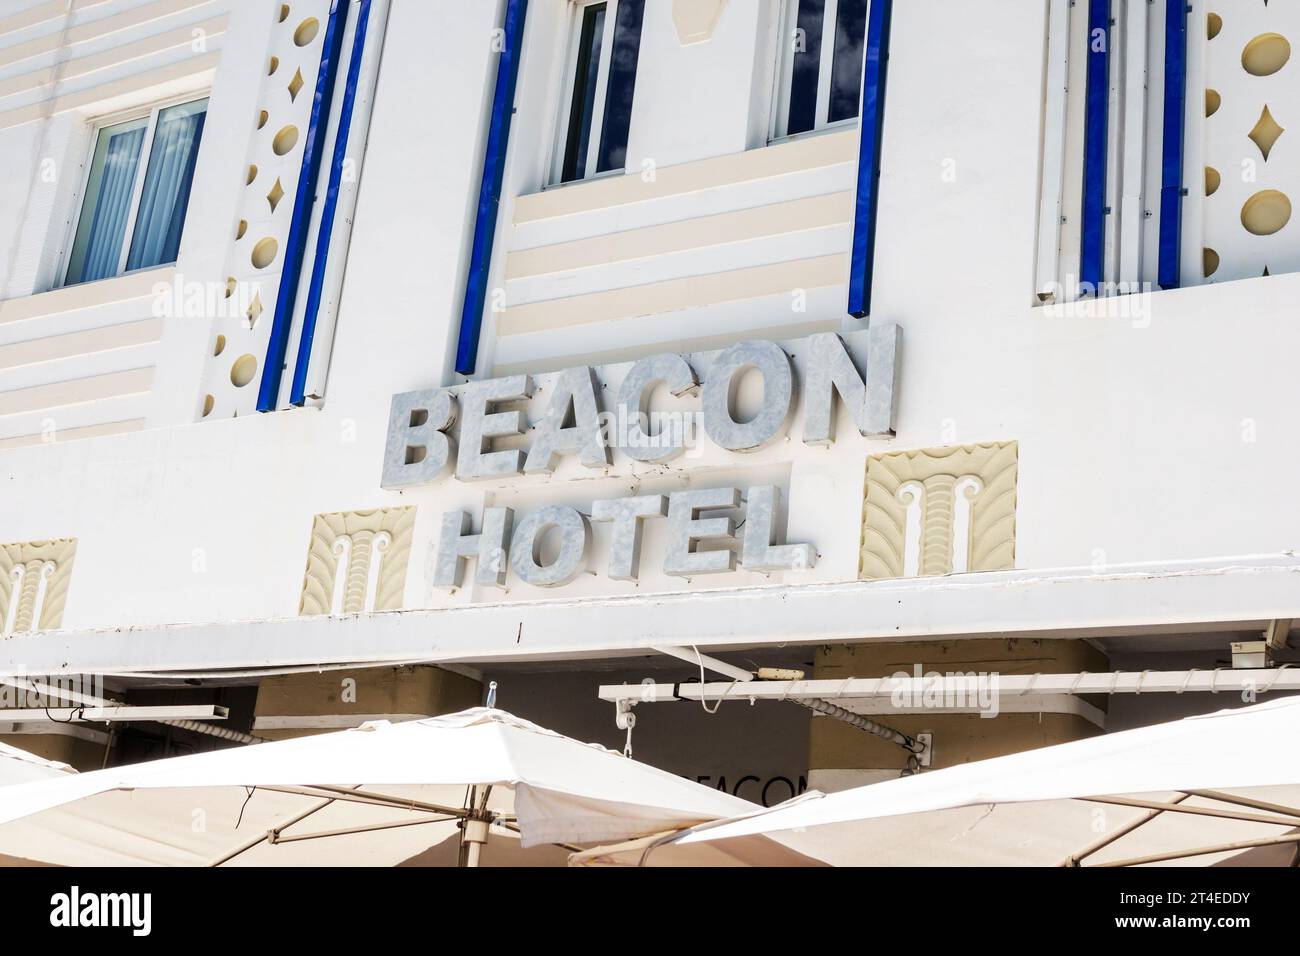 Miami Beach Florida,outside exterior,building front entrance hotel,Ocean Drive,Beacon South Beach Hotel sign,Art Deco style architecture,hotels motels Stock Photo